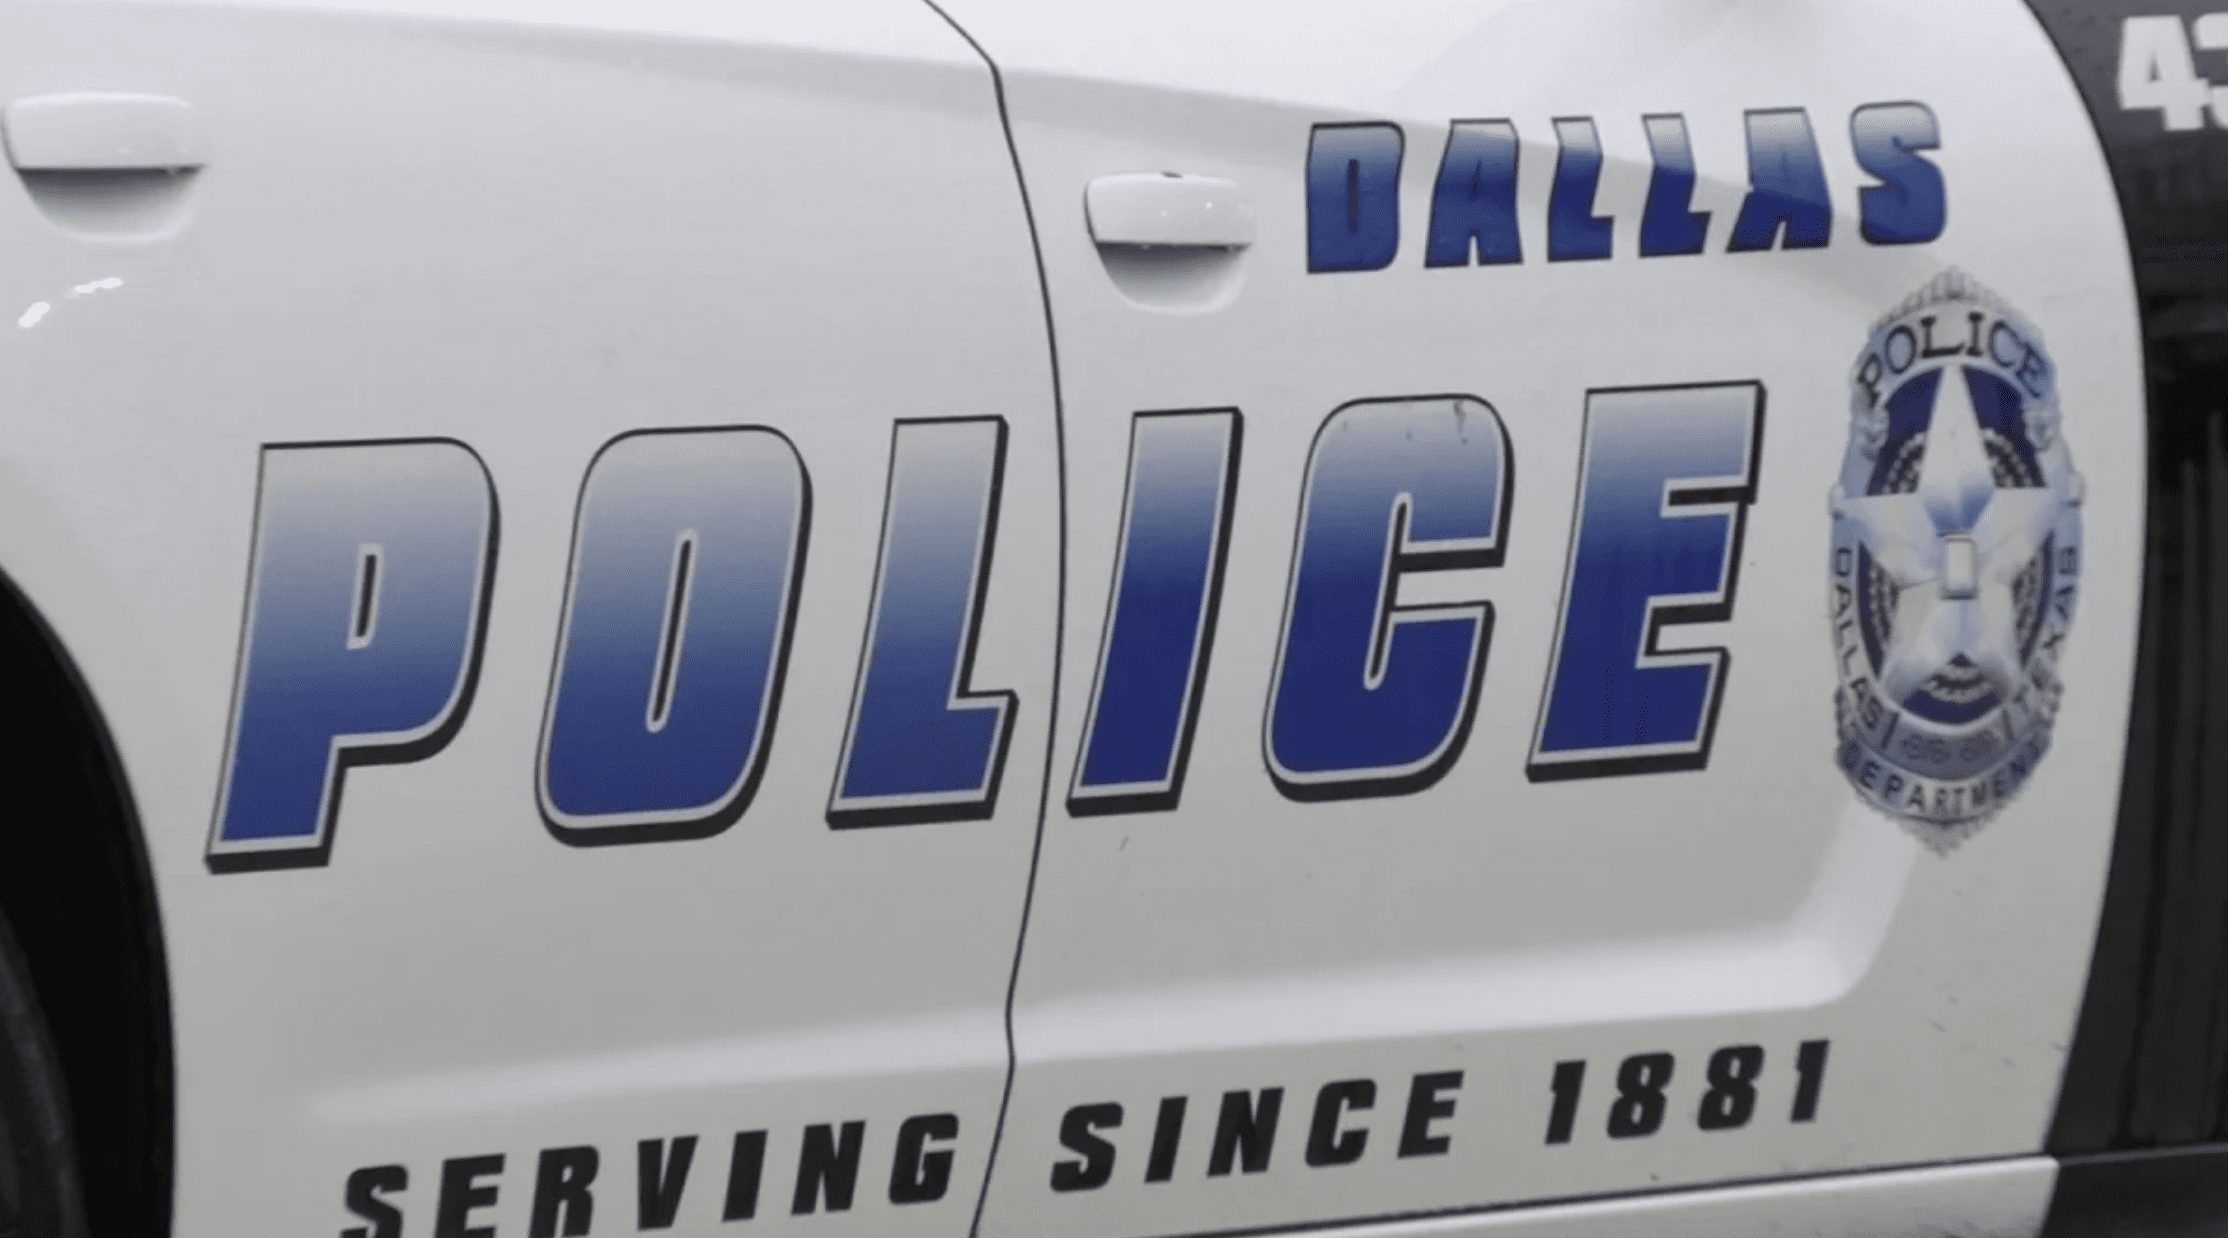 Child Dies After Dog Attack in South Dallas